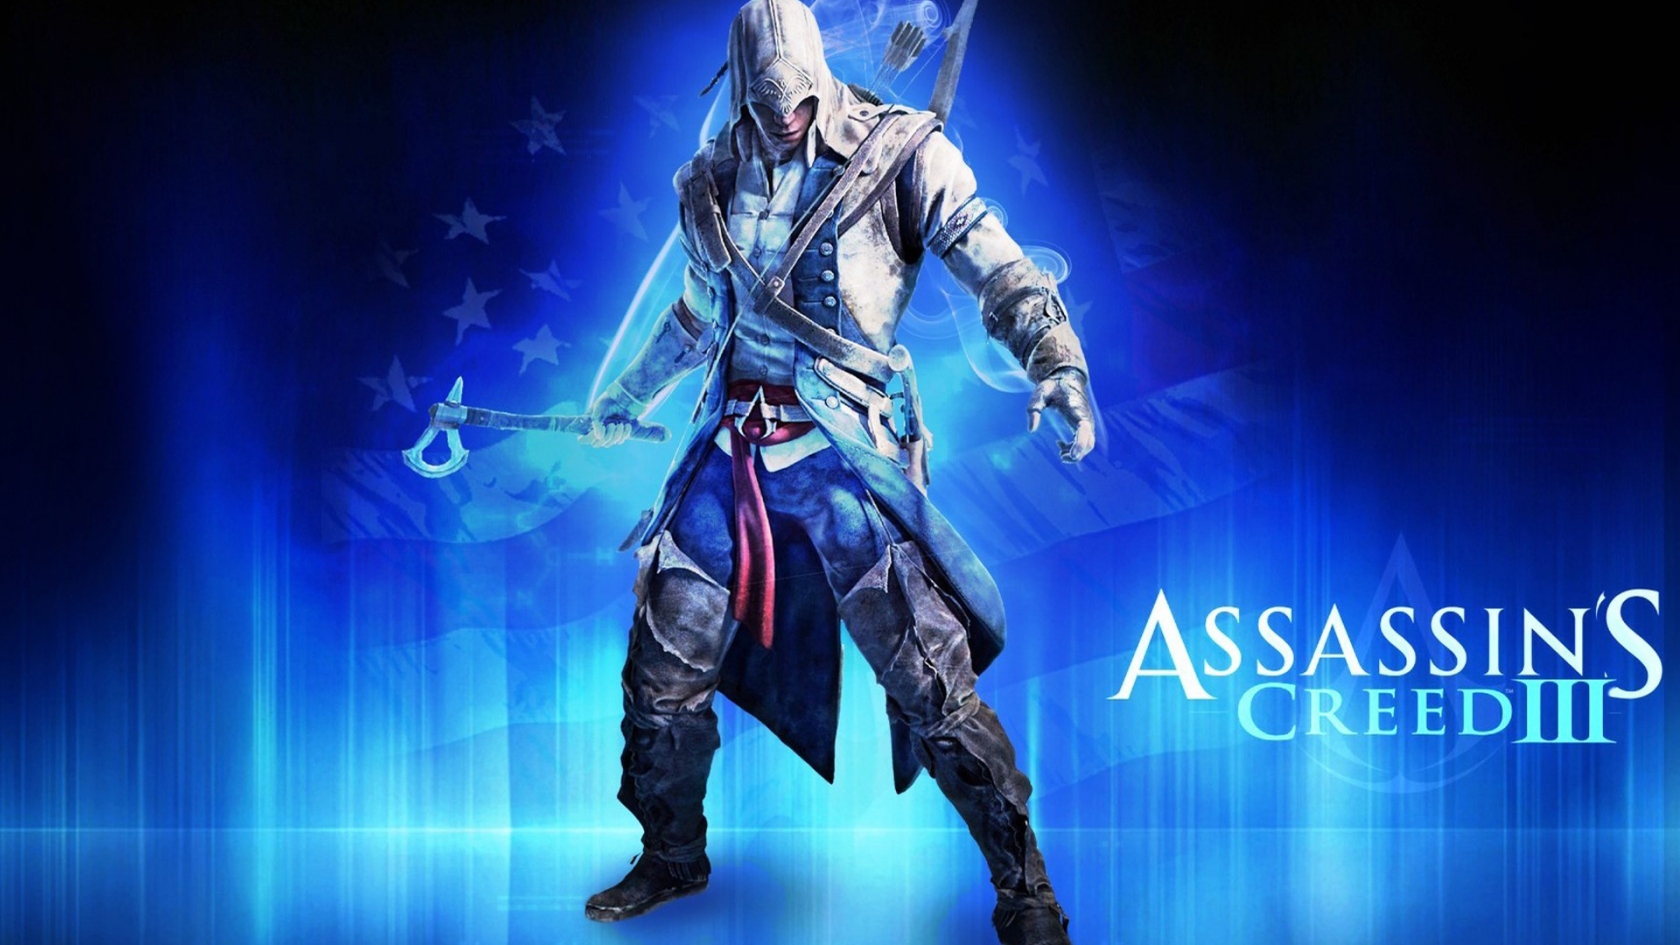 Assassin Creed III for 1680 x 945 HDTV resolution